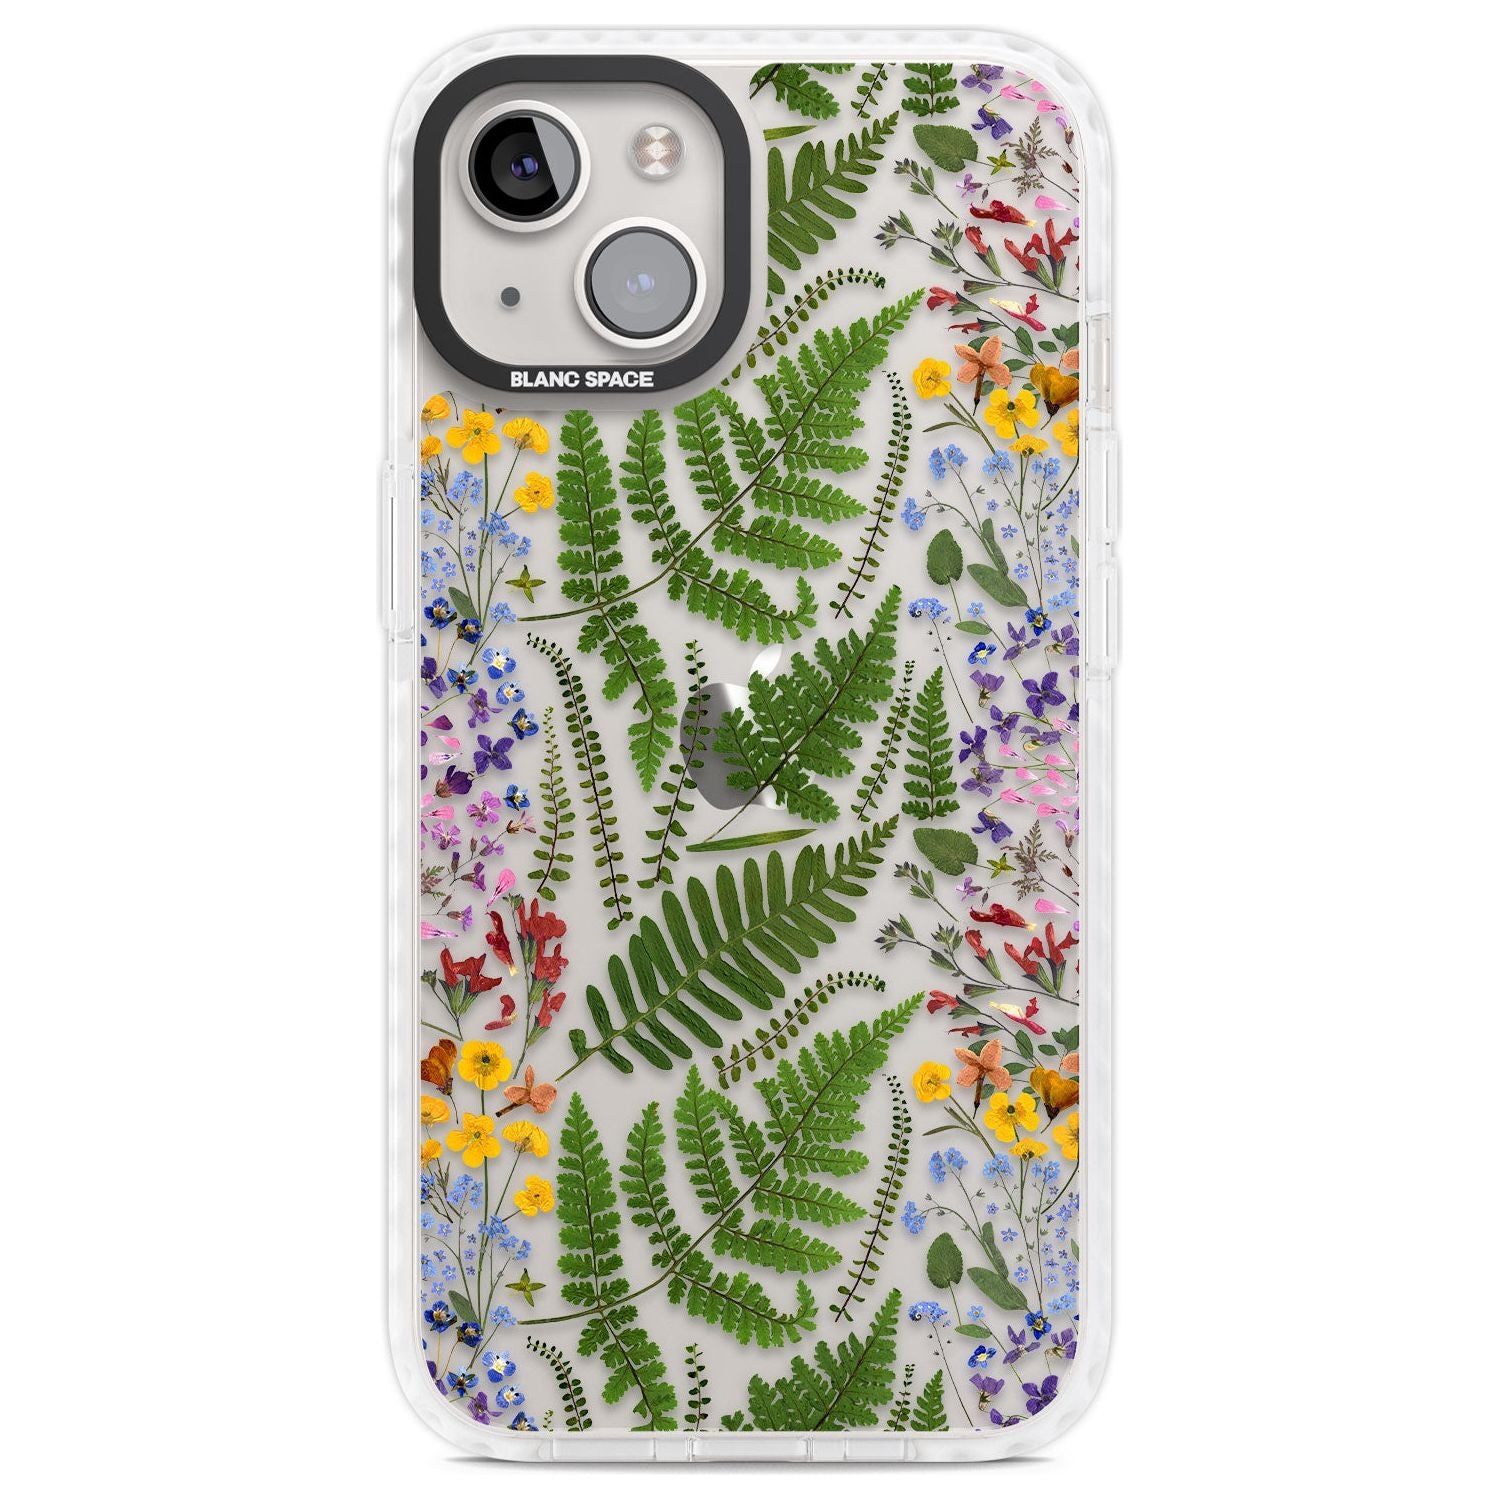 Busy Floral and Fern Design Phone Case iPhone 13 / Impact Case,iPhone 14 / Impact Case,iPhone 15 Plus / Impact Case,iPhone 15 / Impact Case Blanc Space